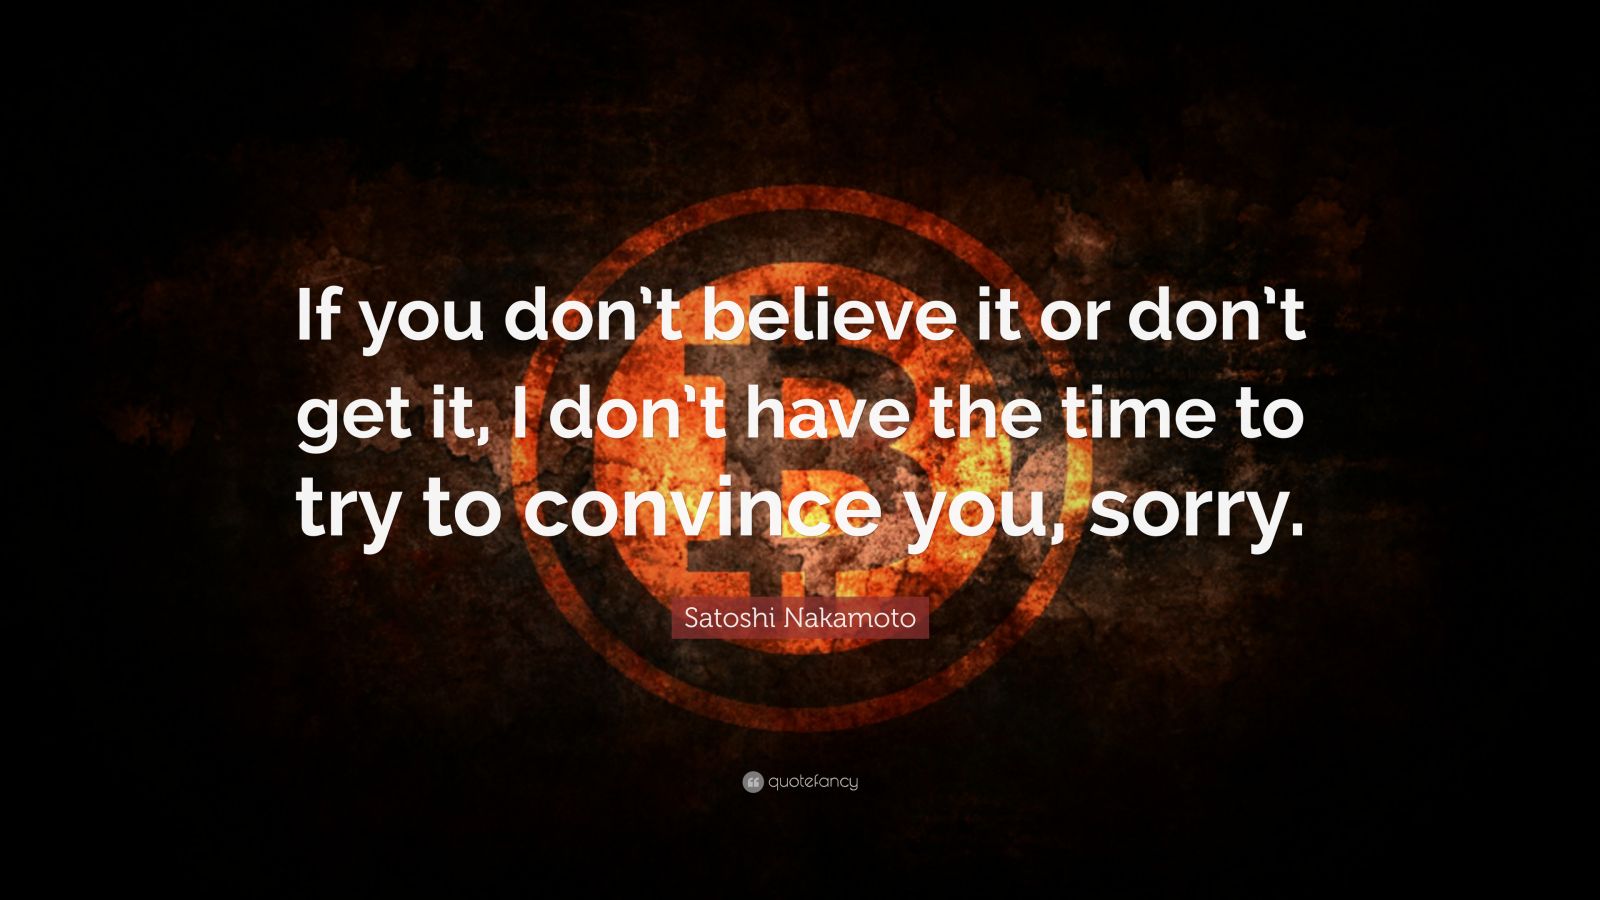 4673913-Satoshi-Nakamoto-Quote-If-you-don-t-believe-it-or-don-t-get-it-I.jpg